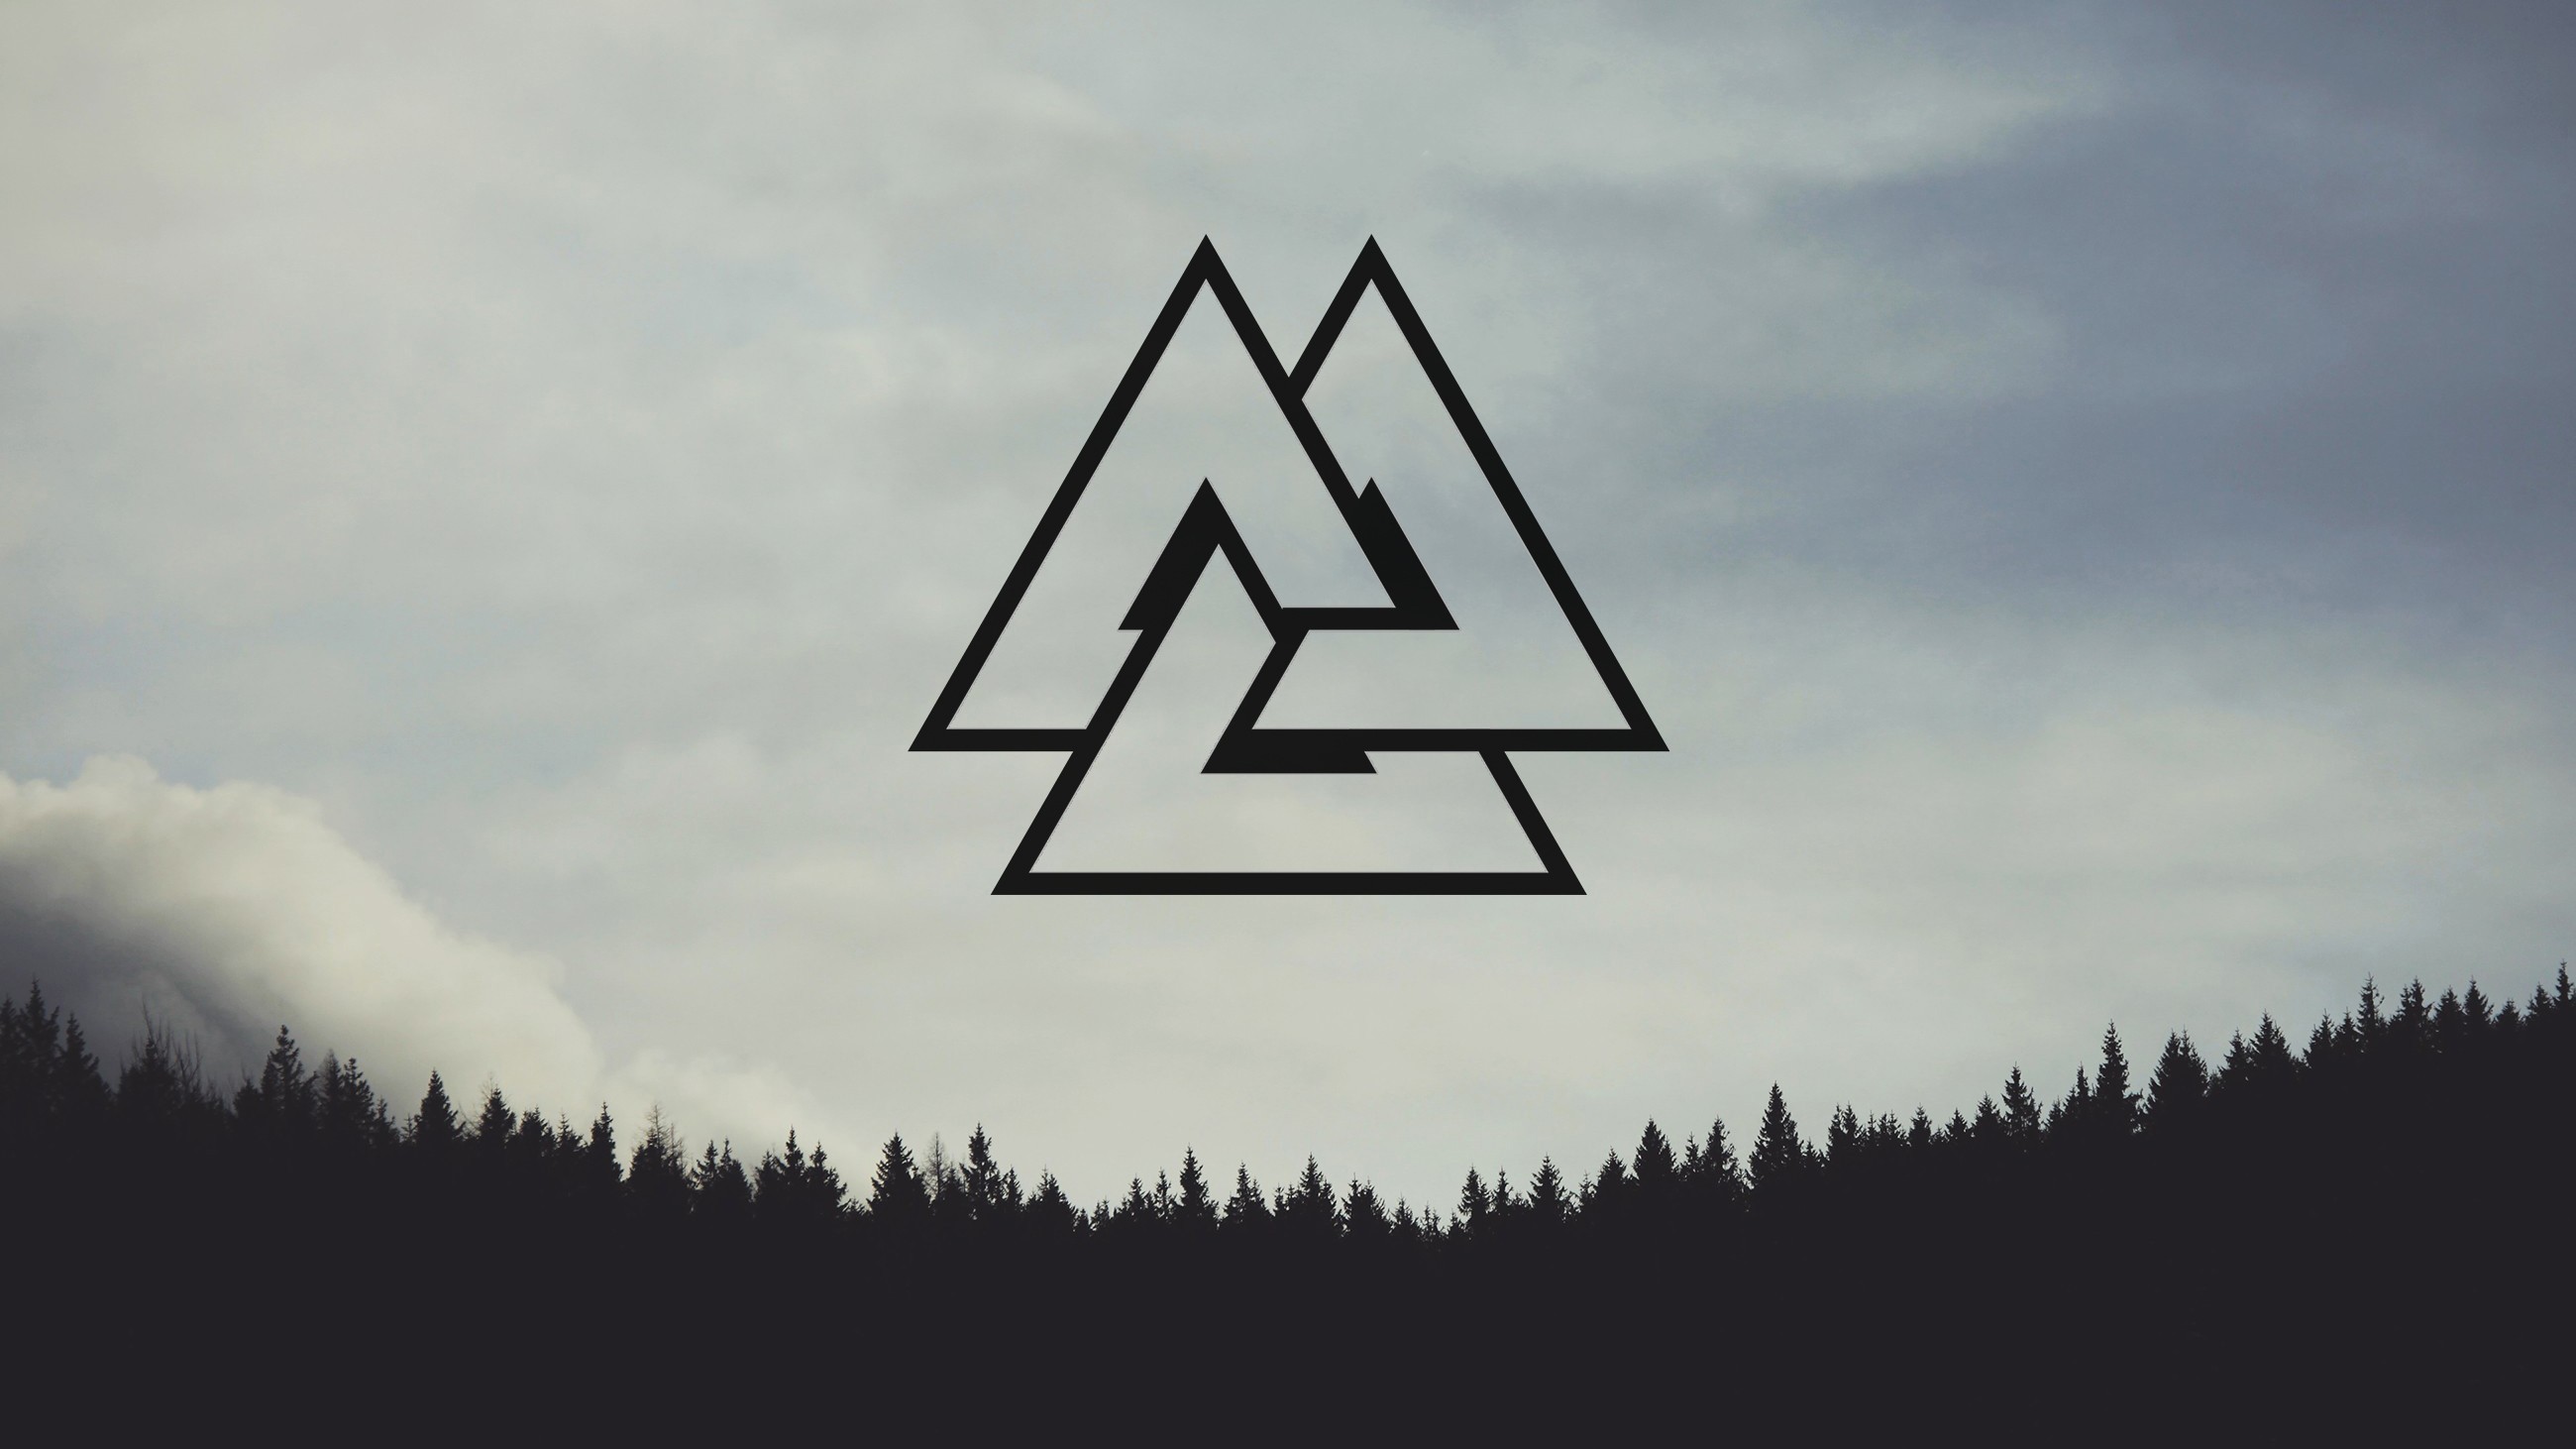 General 2600x1462 valknut Nordic triangle digital art trees nature sky forest geometric figures outdoors pine trees clouds